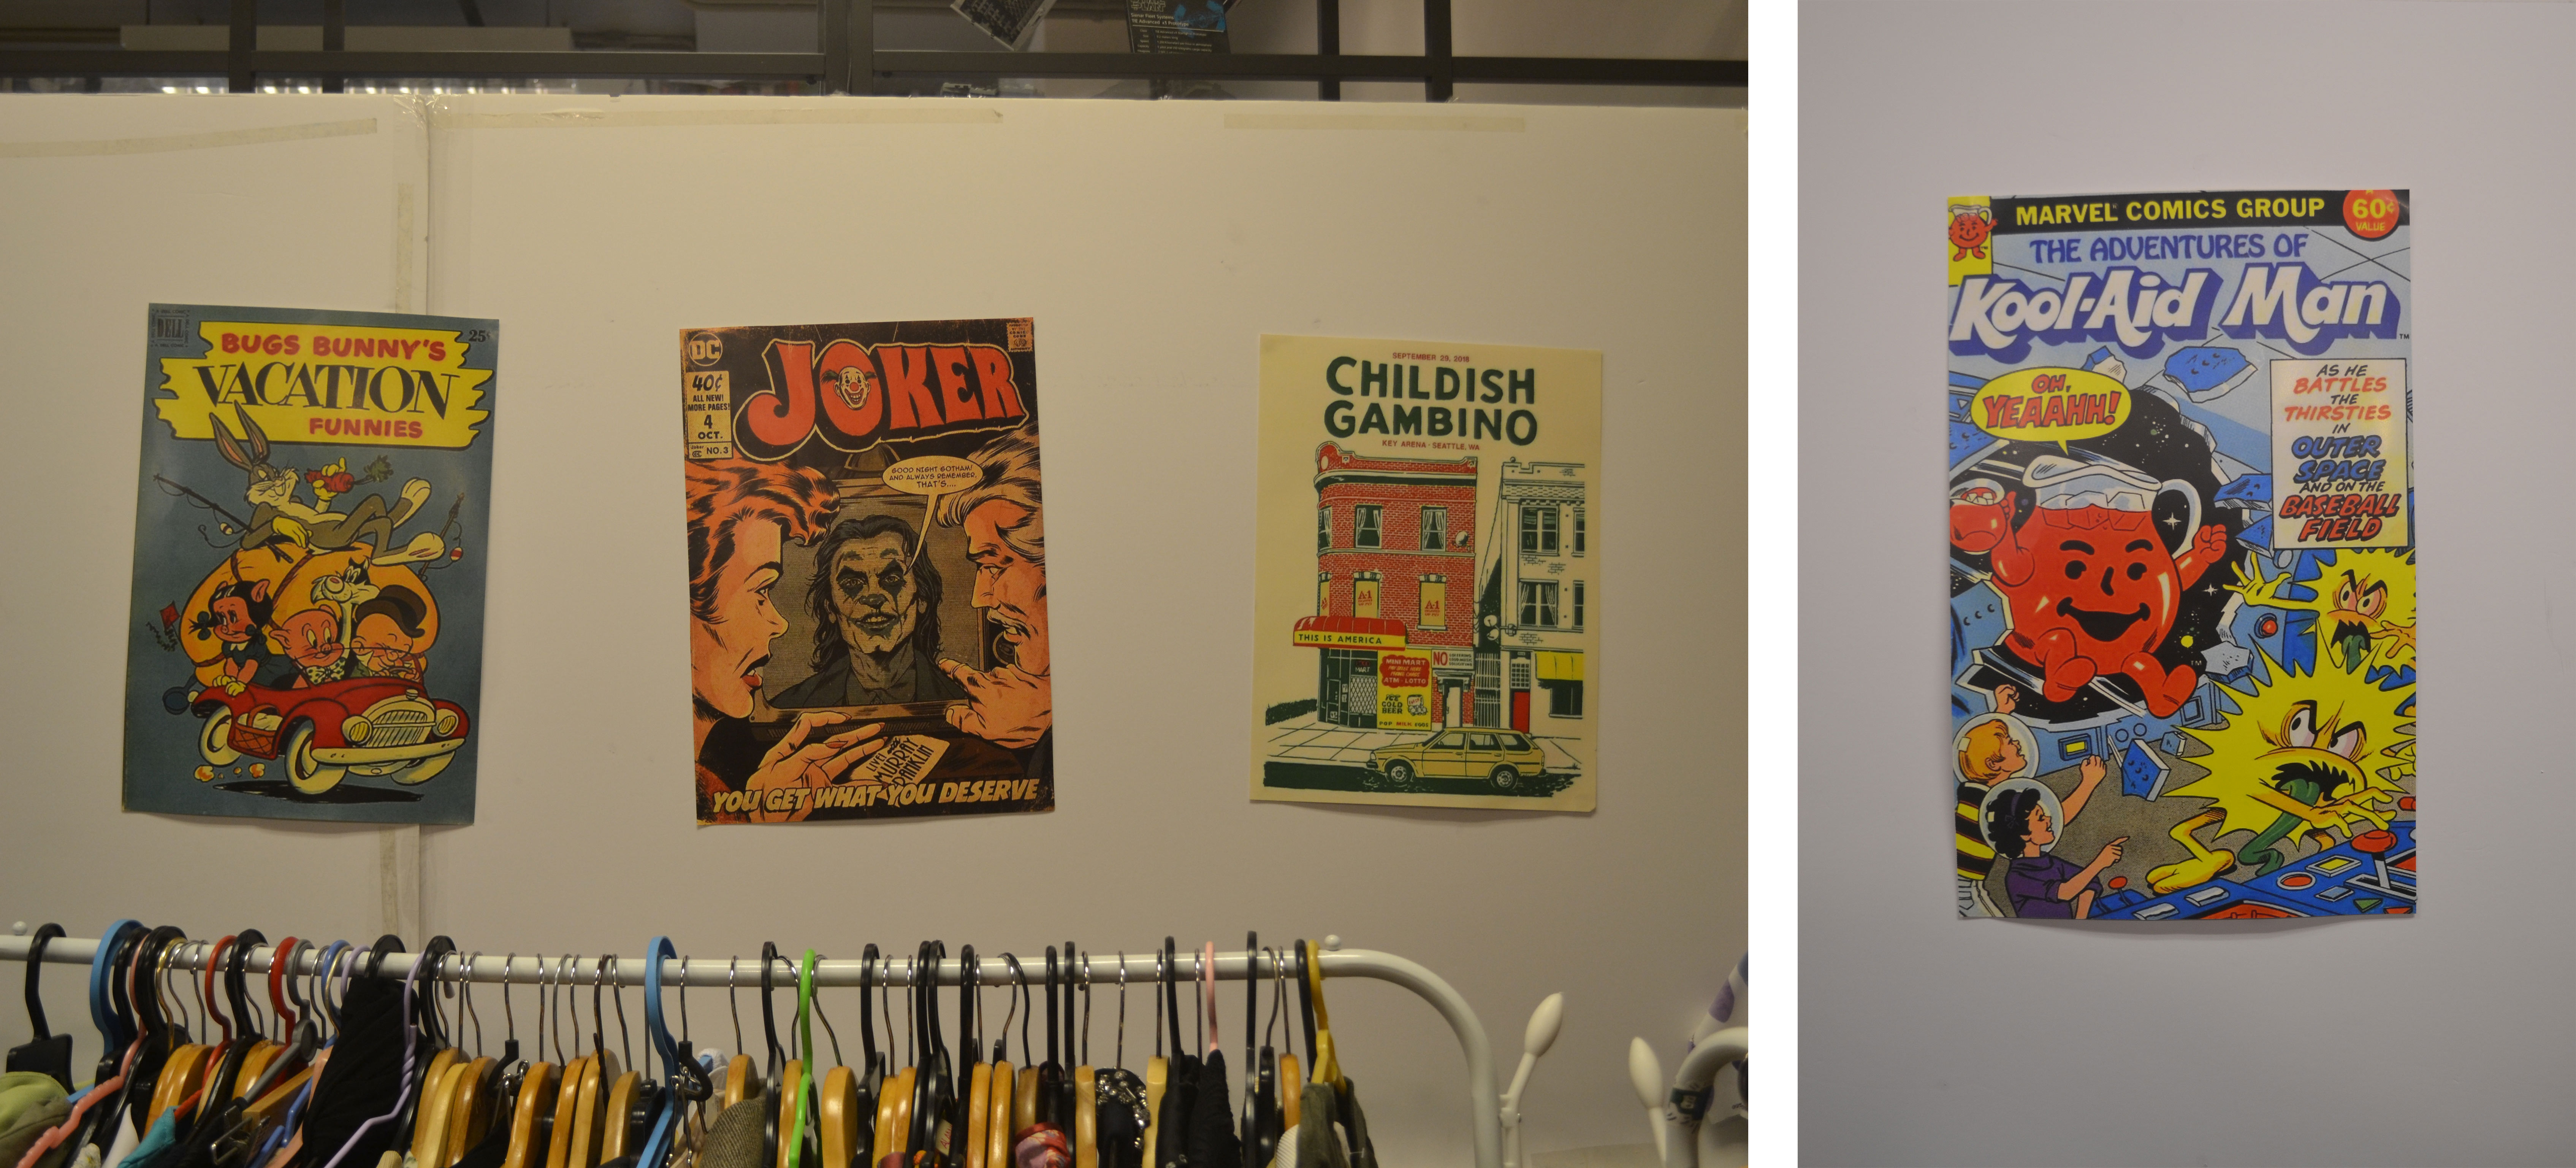 Vintage posters were displayed on the walls throughout the store. 
